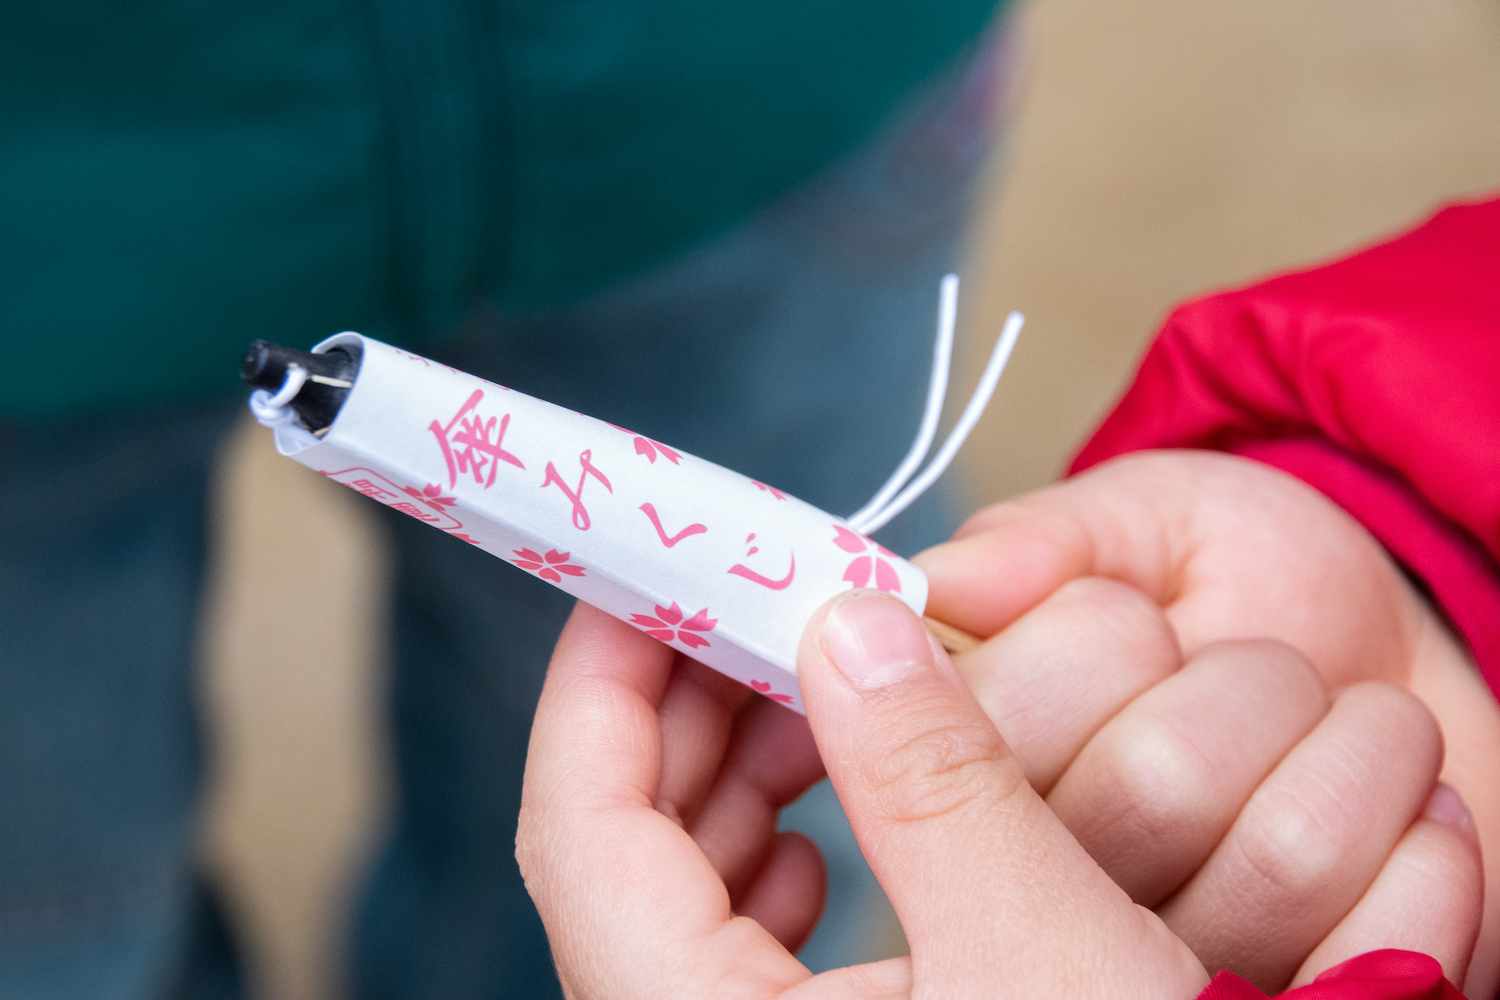 The hands of a child with Japanese umbrella-shaped fortune telling slips. Japanese characters are written on it. It says ' Kasa mikuji' which means ' the umbrella-shaped fortune telling'.